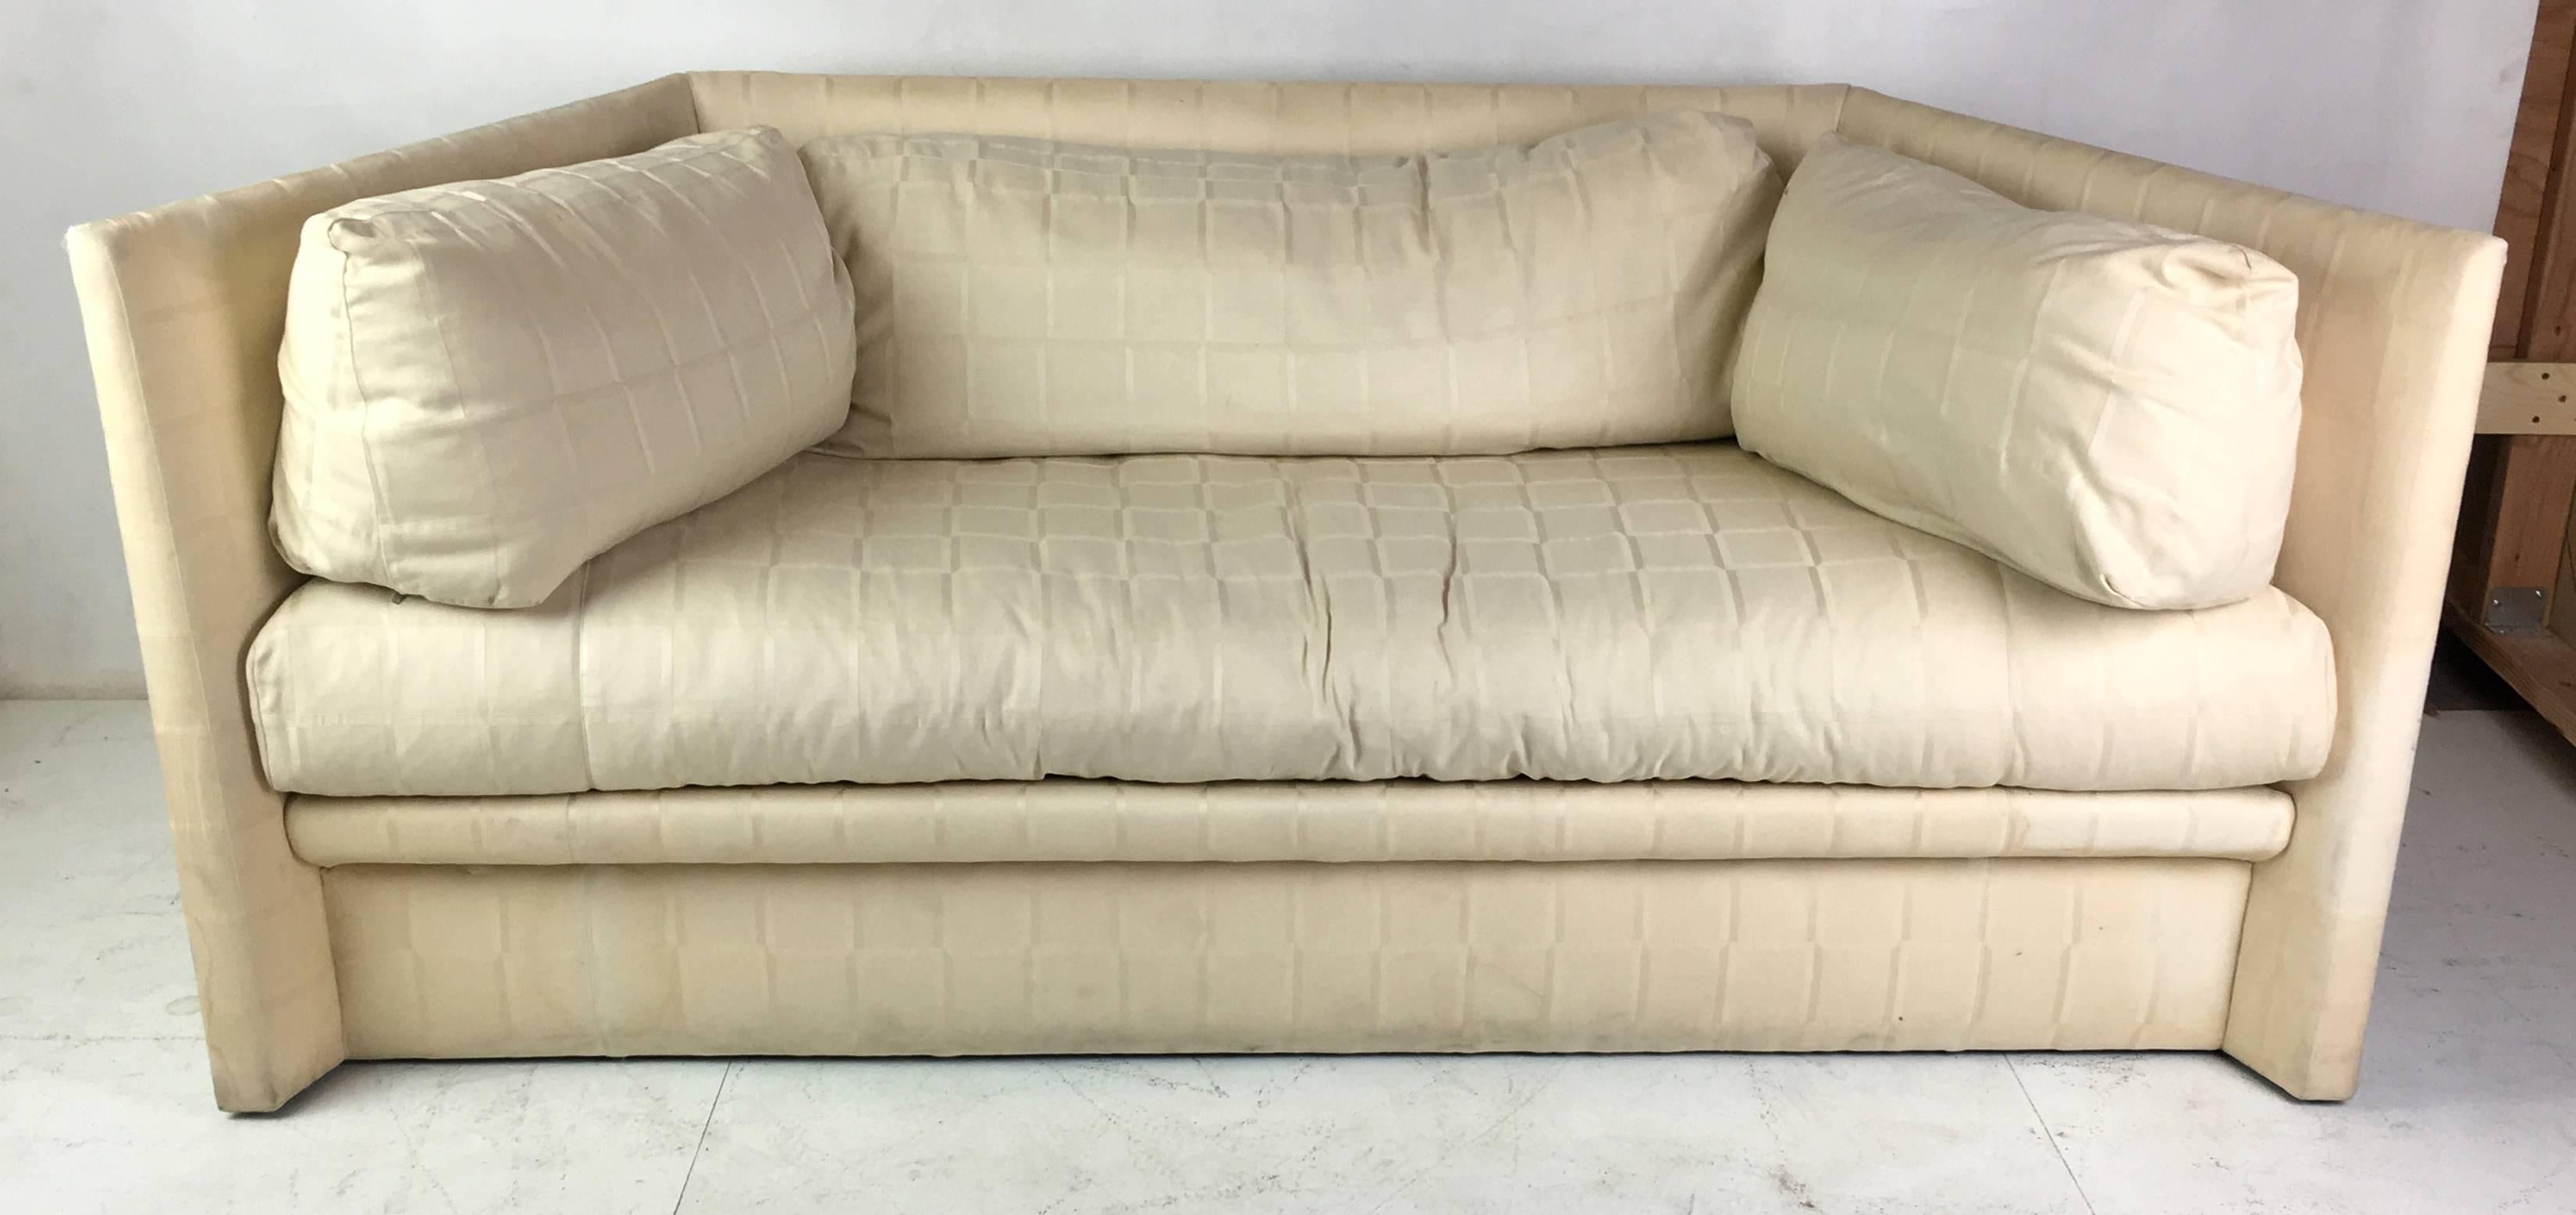 Fantastic shelter sofa with angled sides and down cushions by the Master, John Saladino, for Baker Furniture. This fantastic occasional piece is unbelievably lounge-y and comfortable while looking as stylish as it gets, as expected from Saladino.